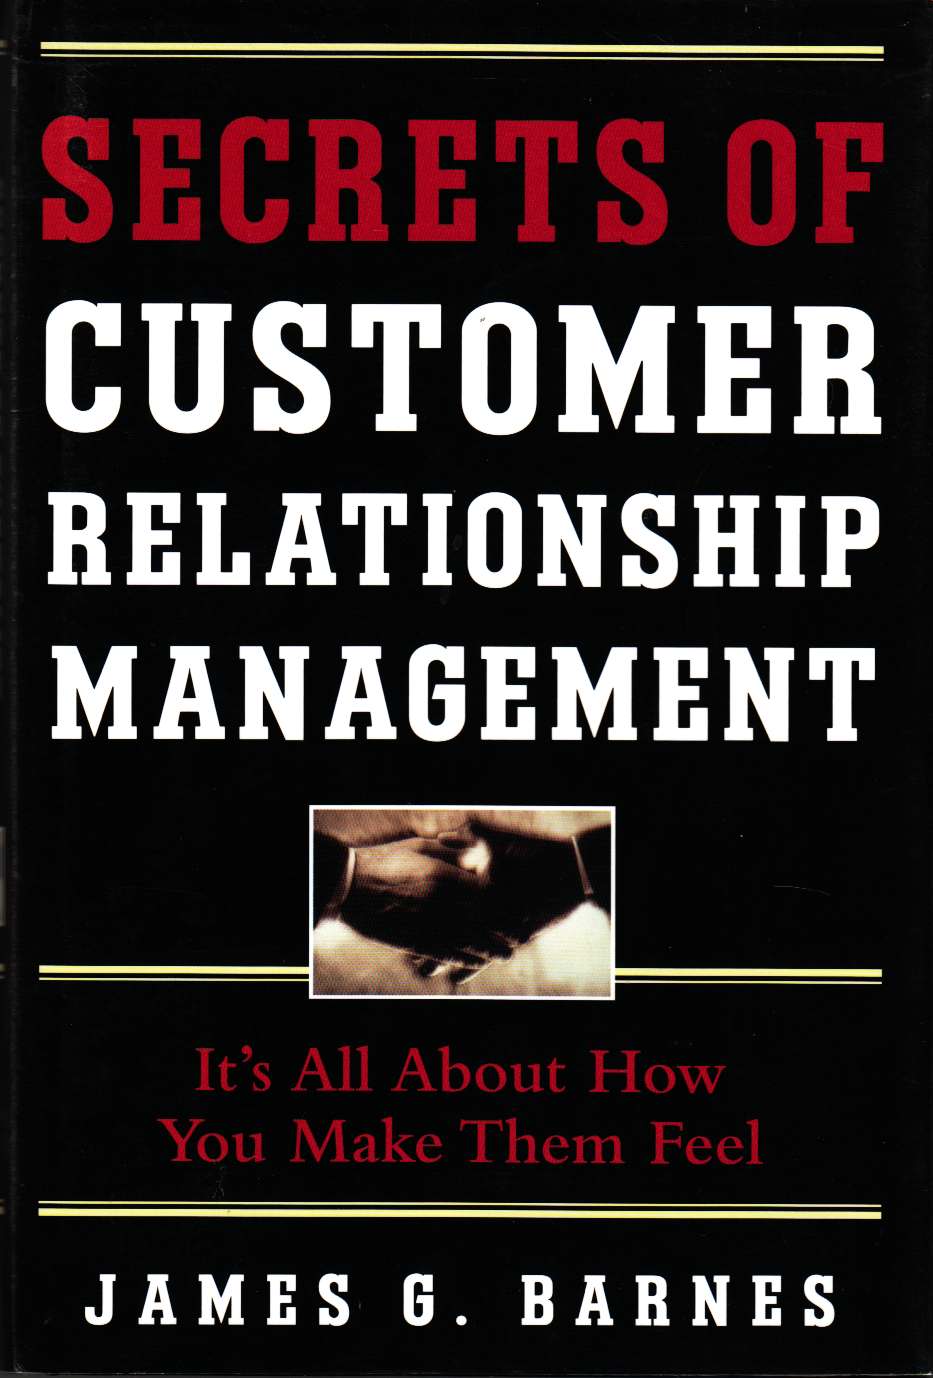 Image for Secrets of Customer Relationship Management It's all about How You Make Them Feel